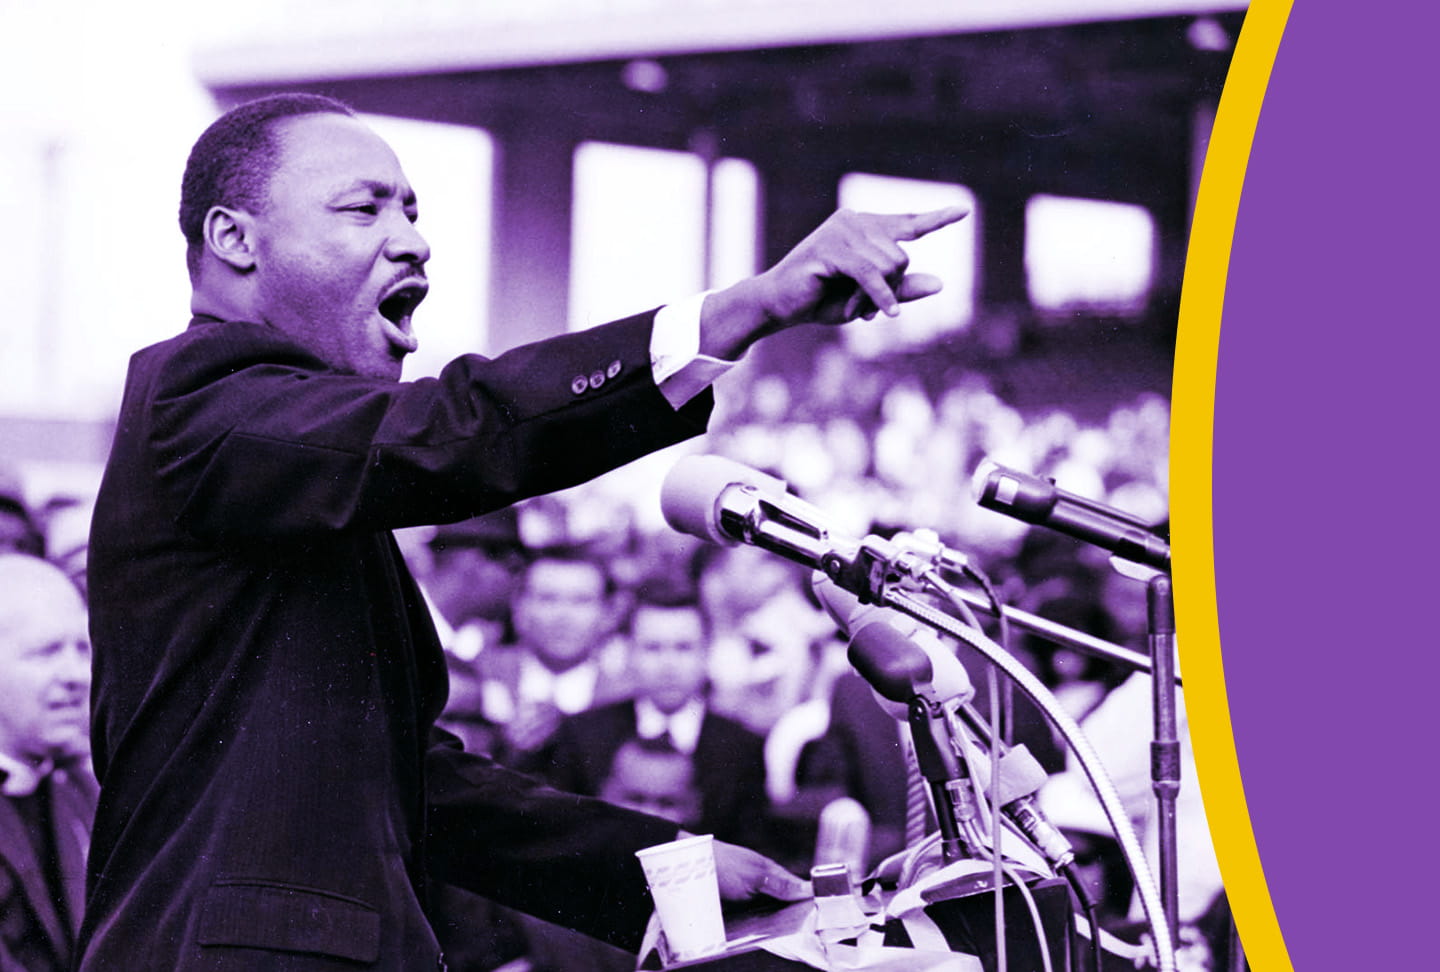 Wellstar Honors the Life and Legacy of Dr. Martin Luther King Jr. Image